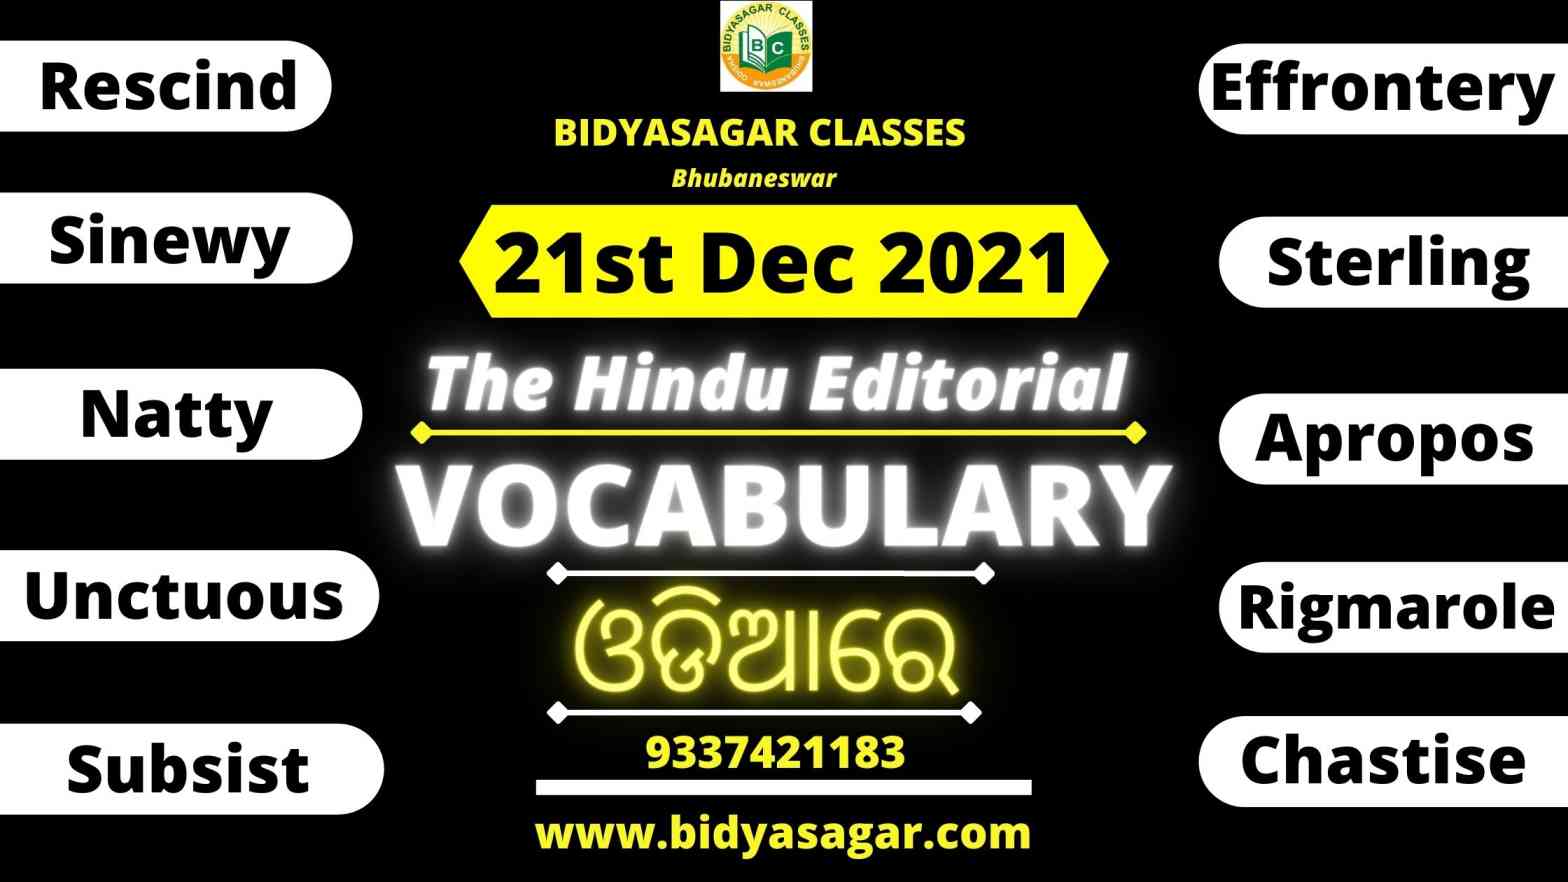 The Hindu Editorial Vocabulary of 21st December 2021